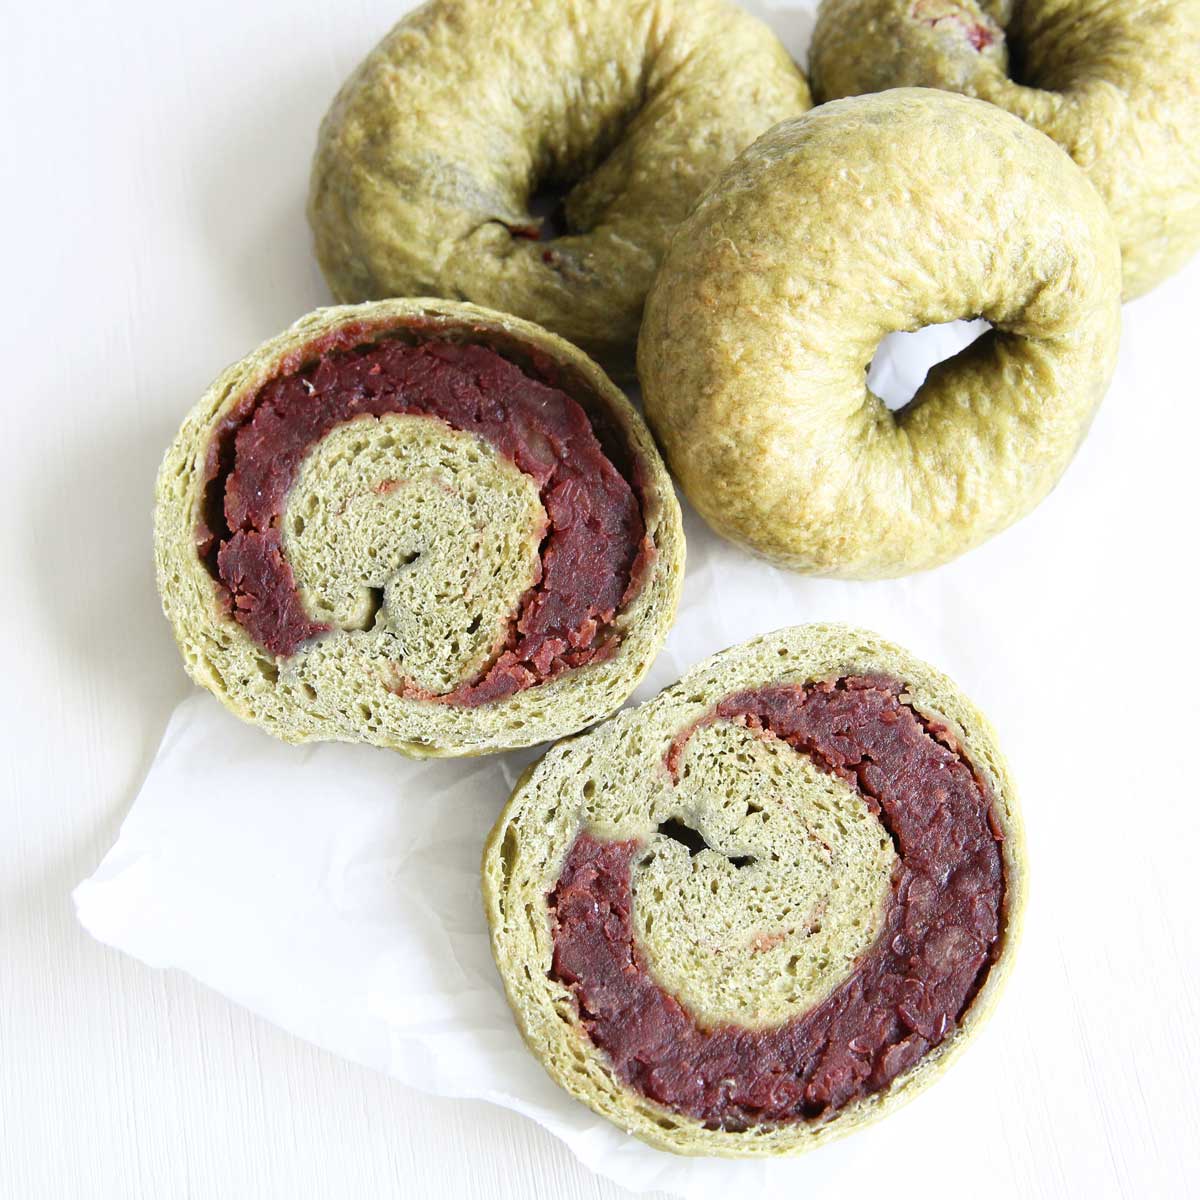 Homemade Applesauce Matcha Bagels with Red Bean Paste Filling - Zucchini Flatbread